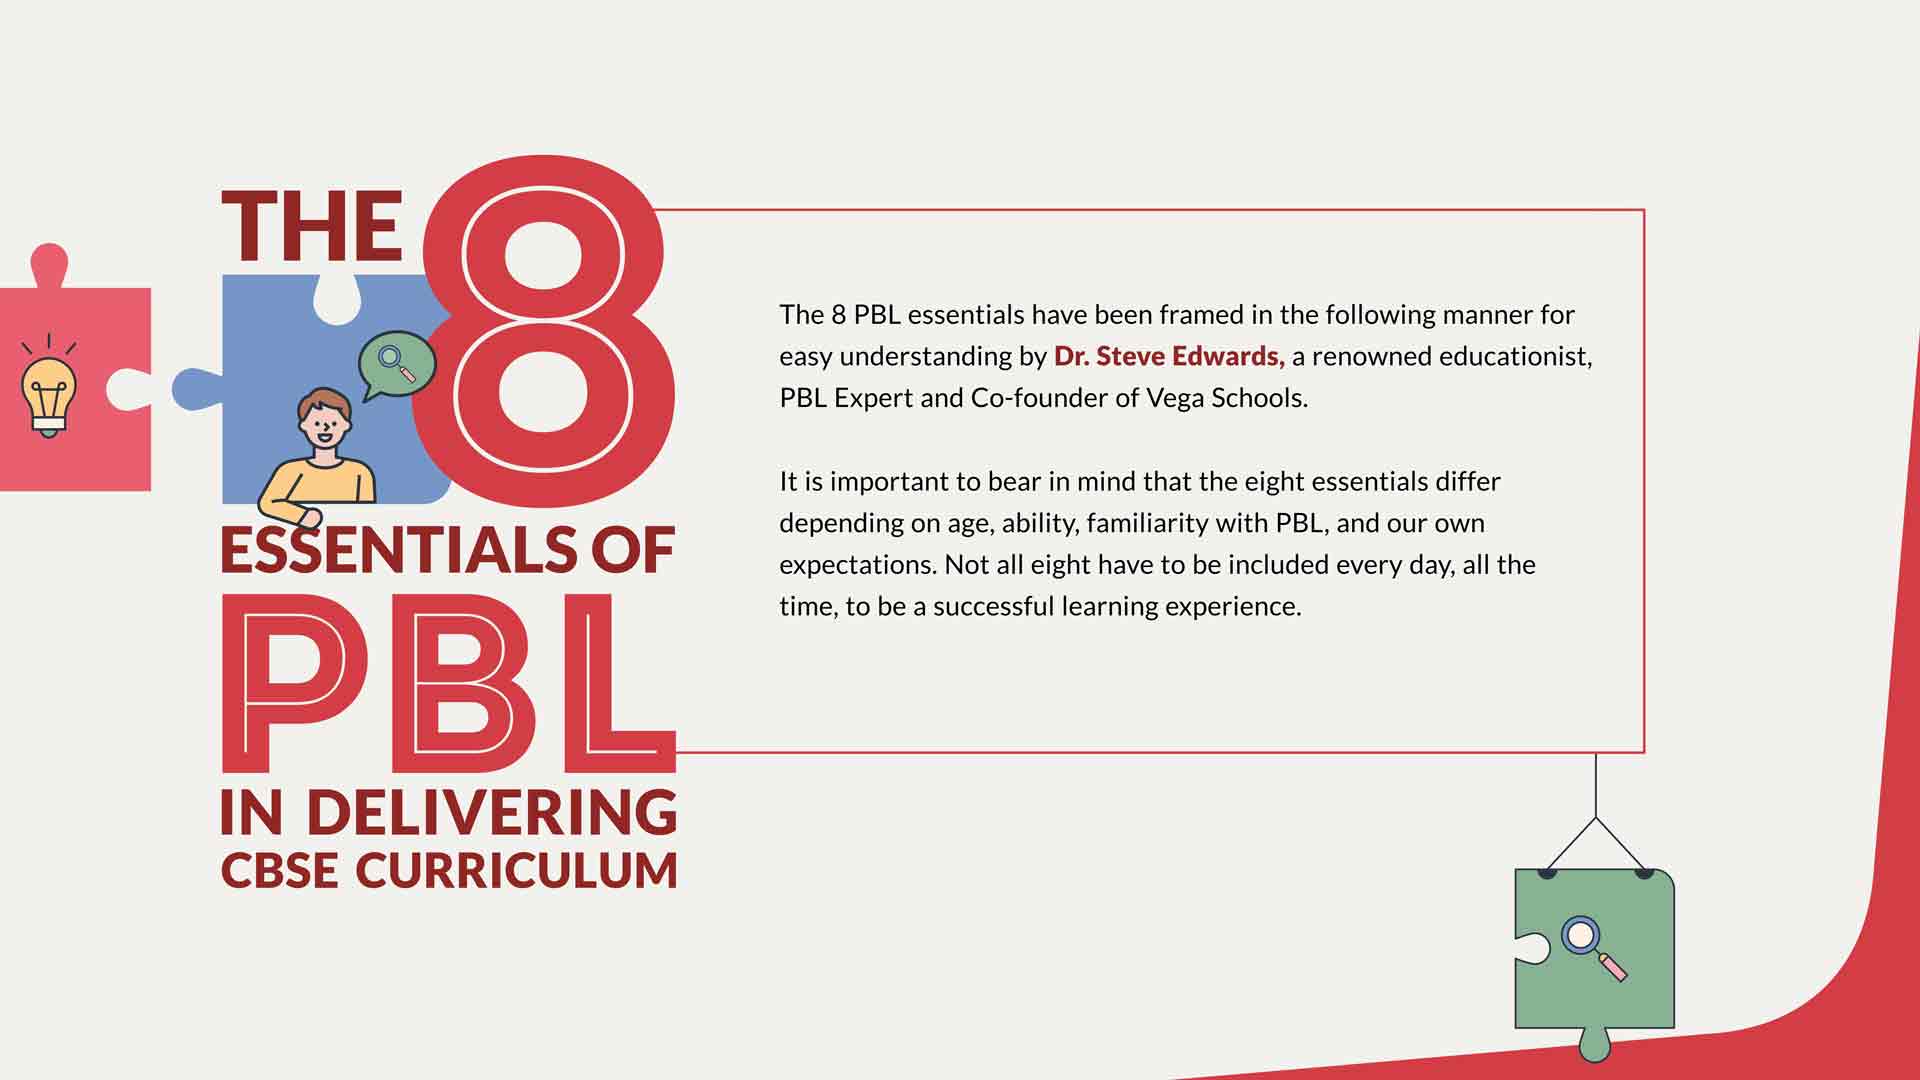 The 8 Essential of PBL in Delivering CBSE Curriculum